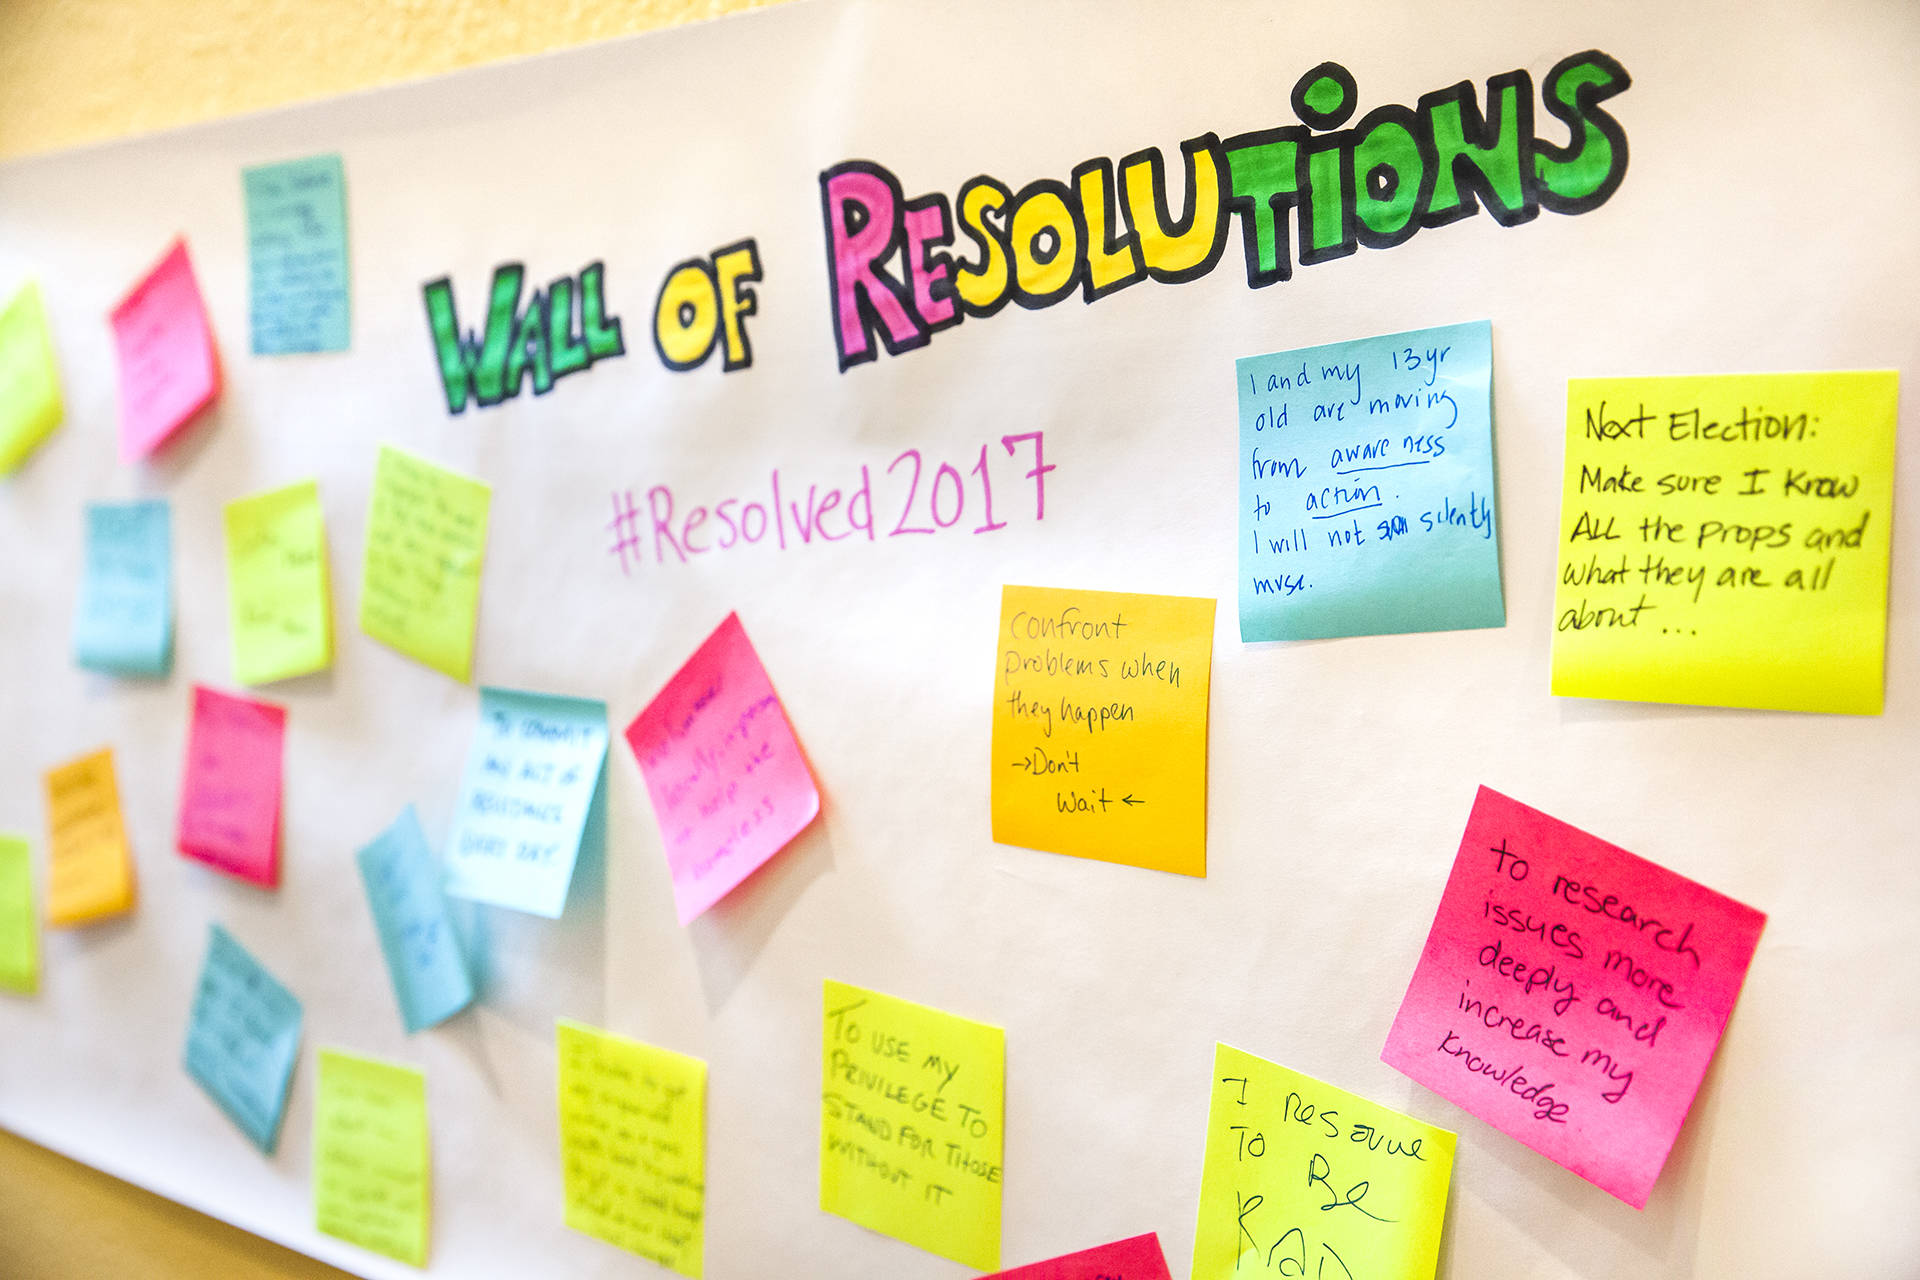 Wall of Resolutions at KQED. Brittany Hosea-Small/KQED